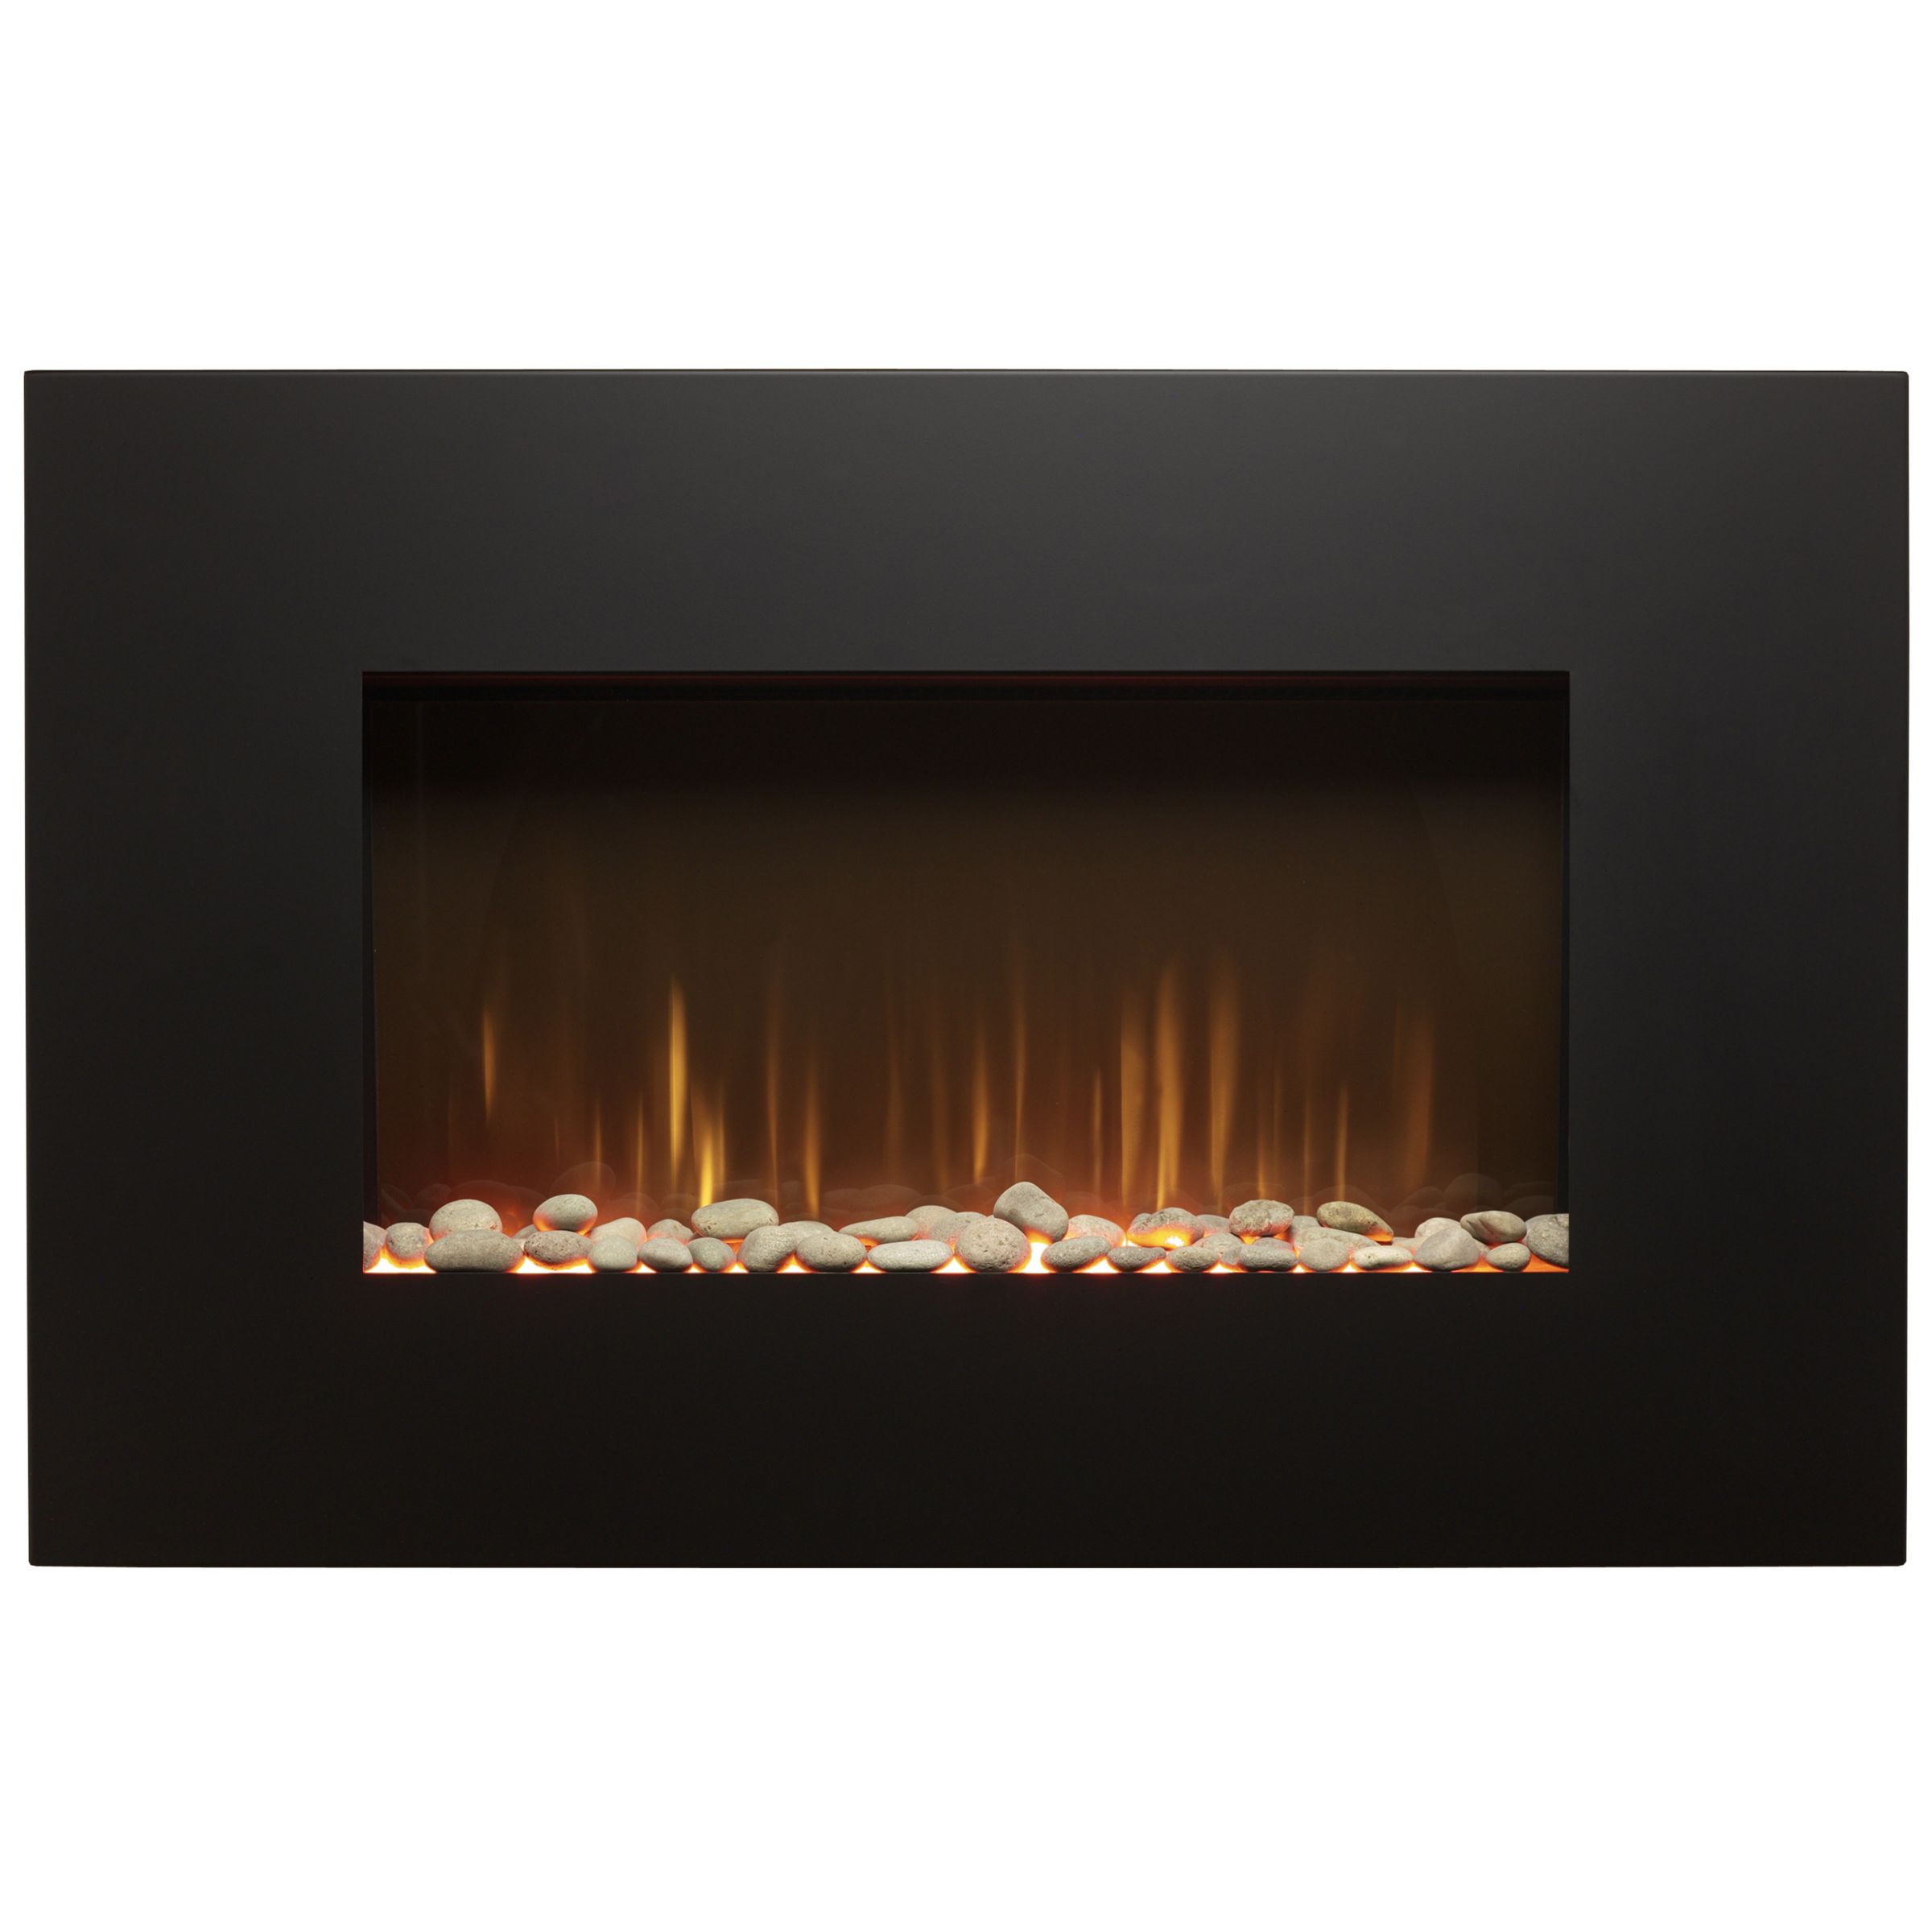 Burley Fuel-Effect Electric Fire Witham 516-R, Brushed Steel / Black at John Lewis